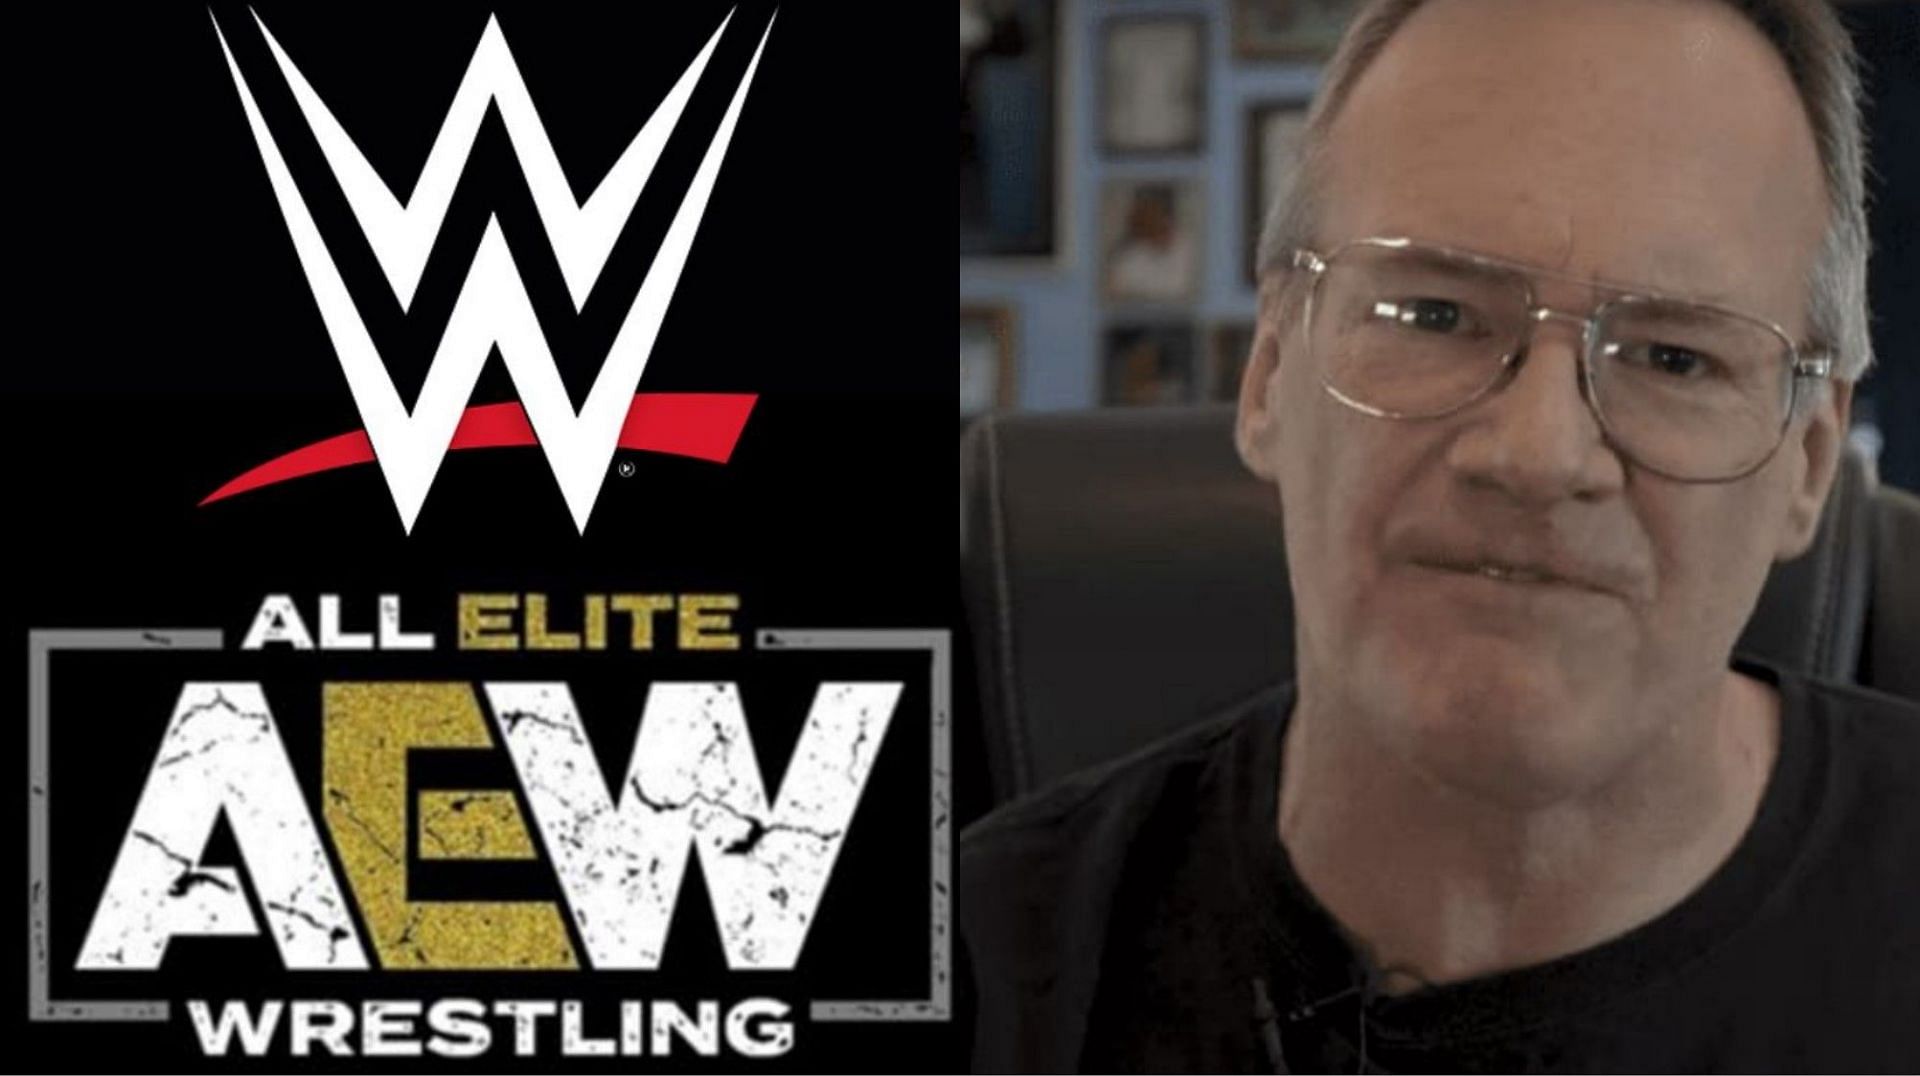 Jim Cornette is a former WWE personality